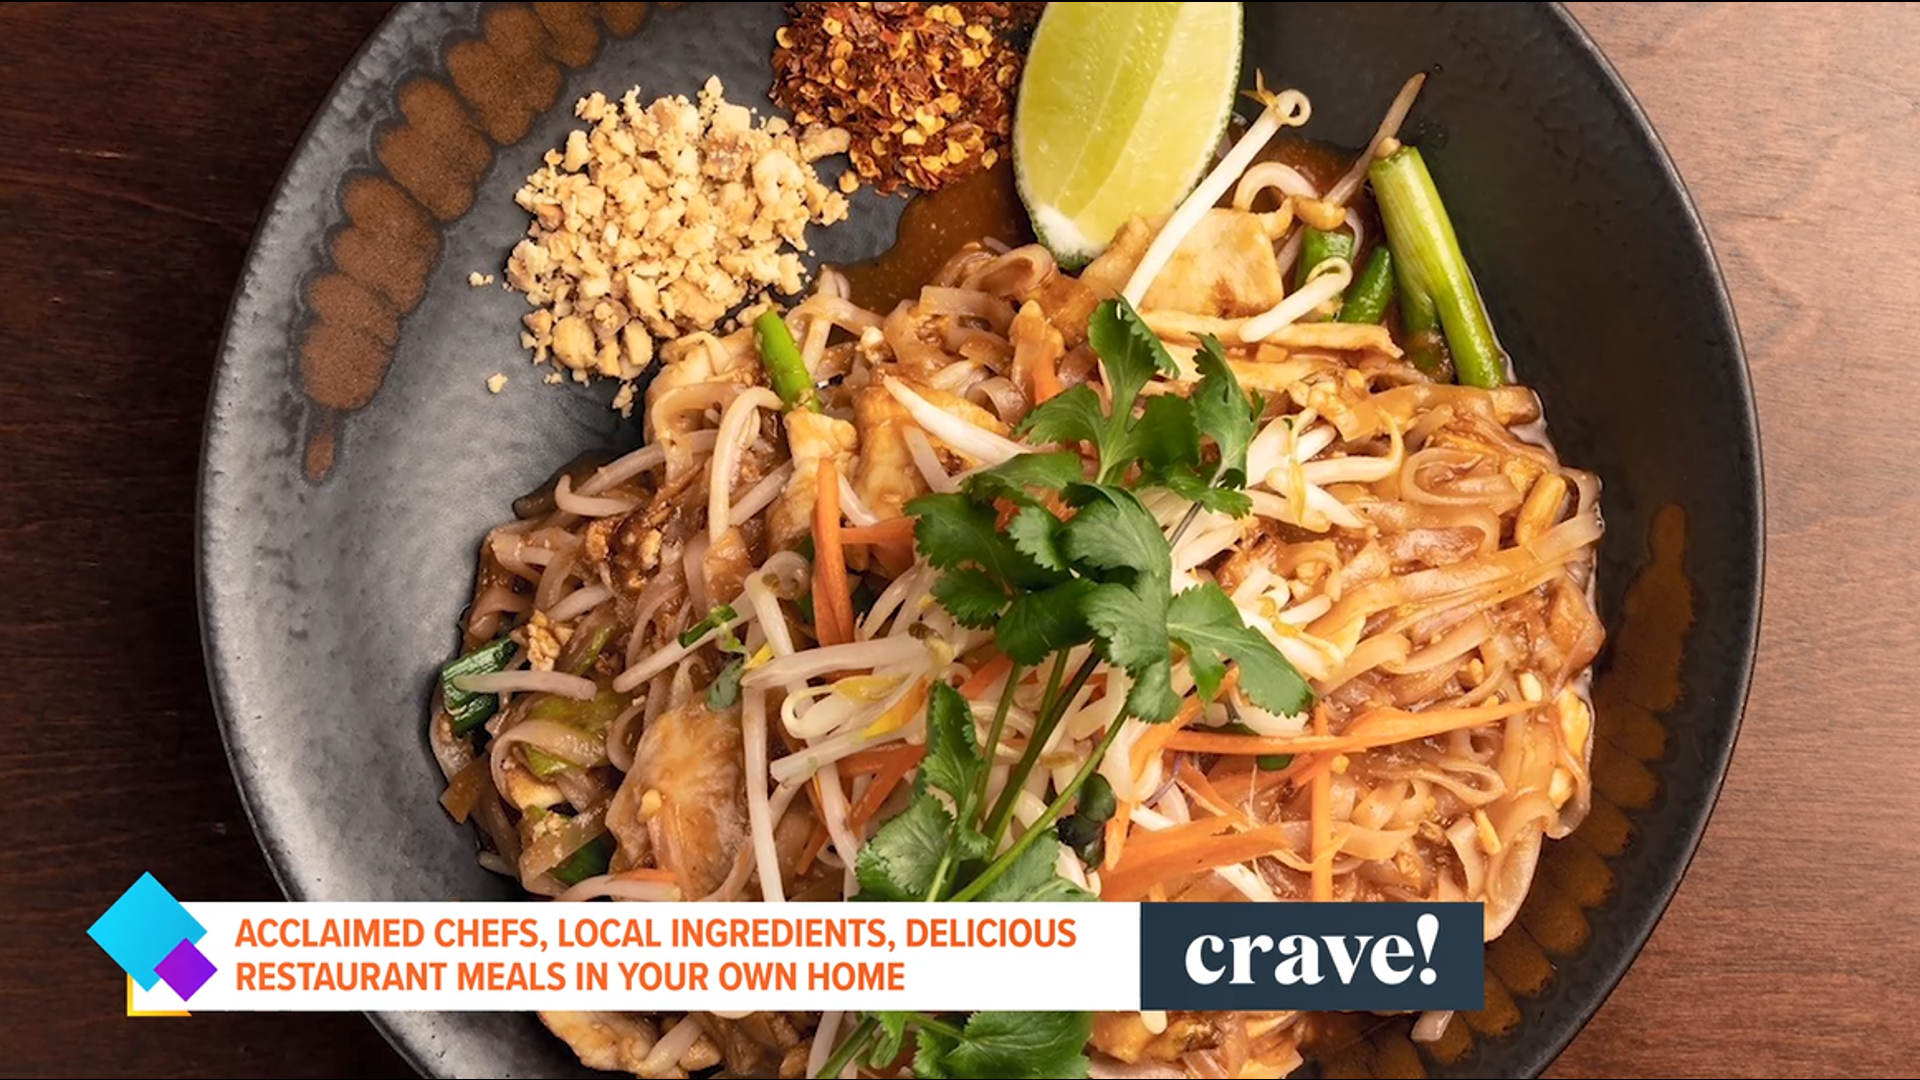 Corey Bailey, Head Chef of Mai Thai explains how Mai Thai is now available through Crave, and how they give back to the community with Crave Cares.